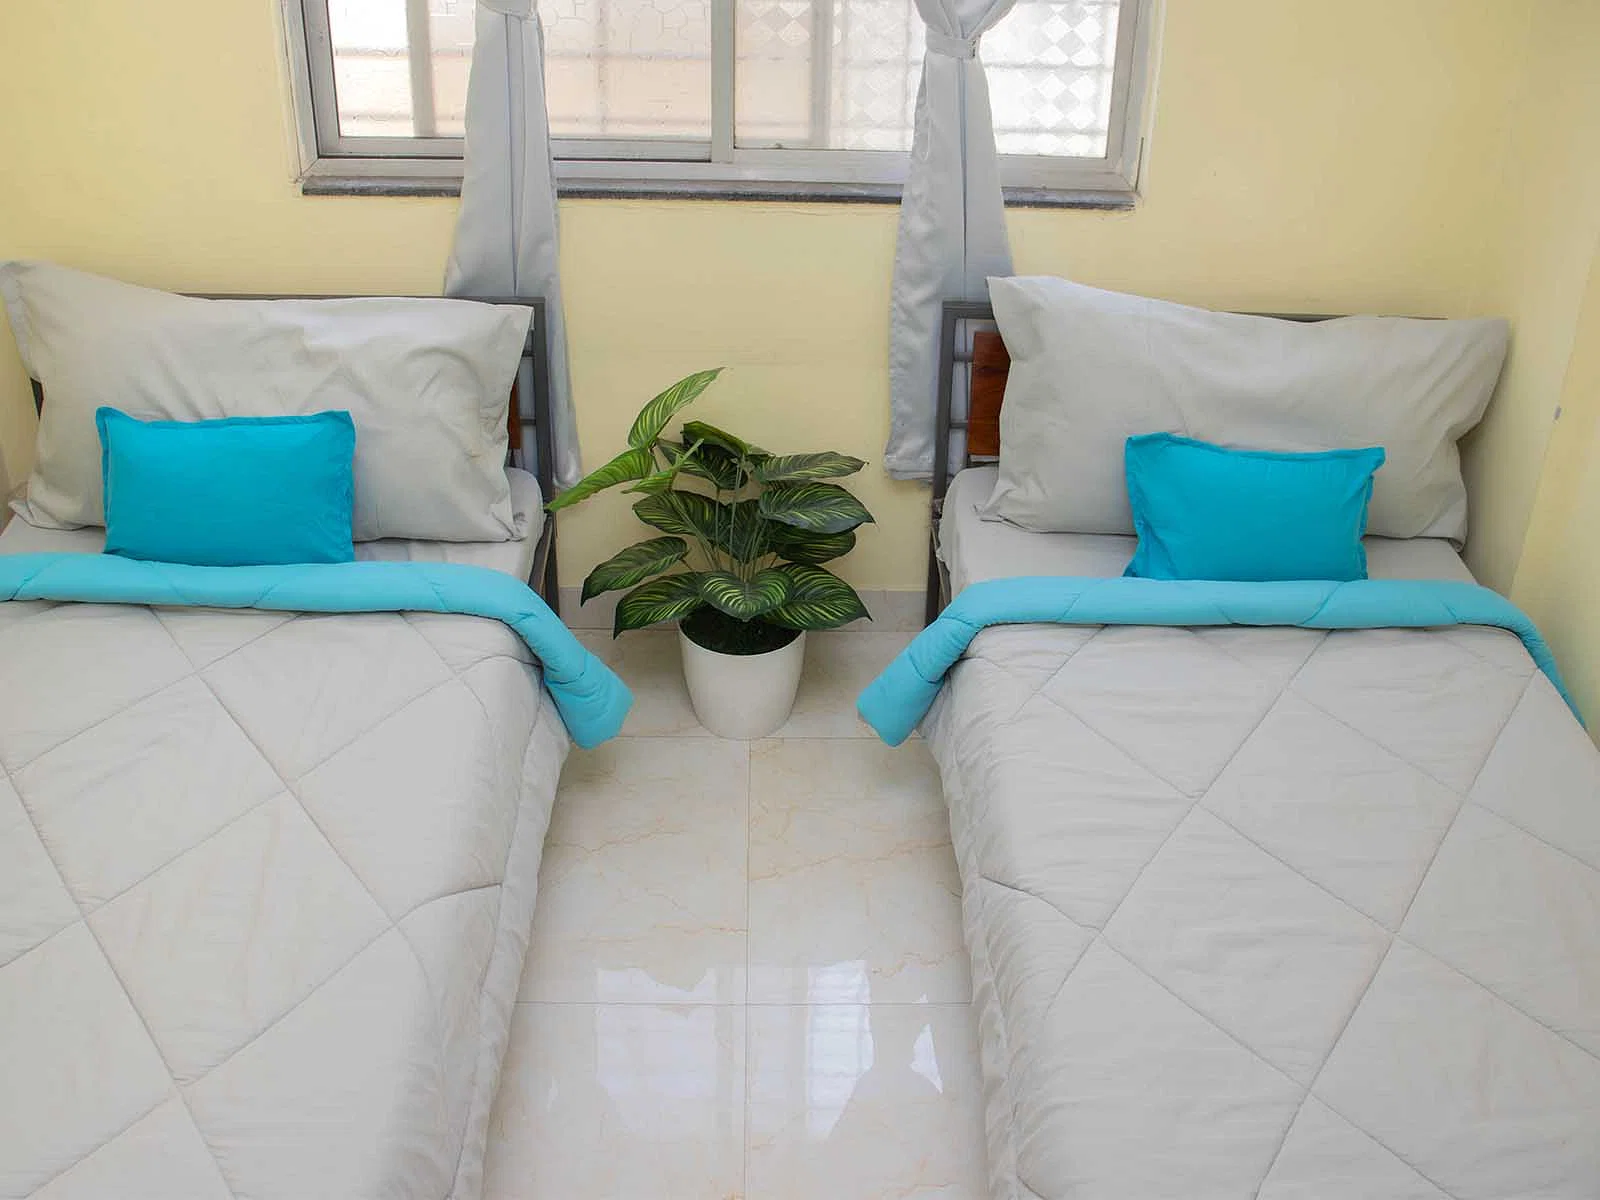 fully furnished Zolo single rooms for rent near me-check out now-Zolo Wisdom